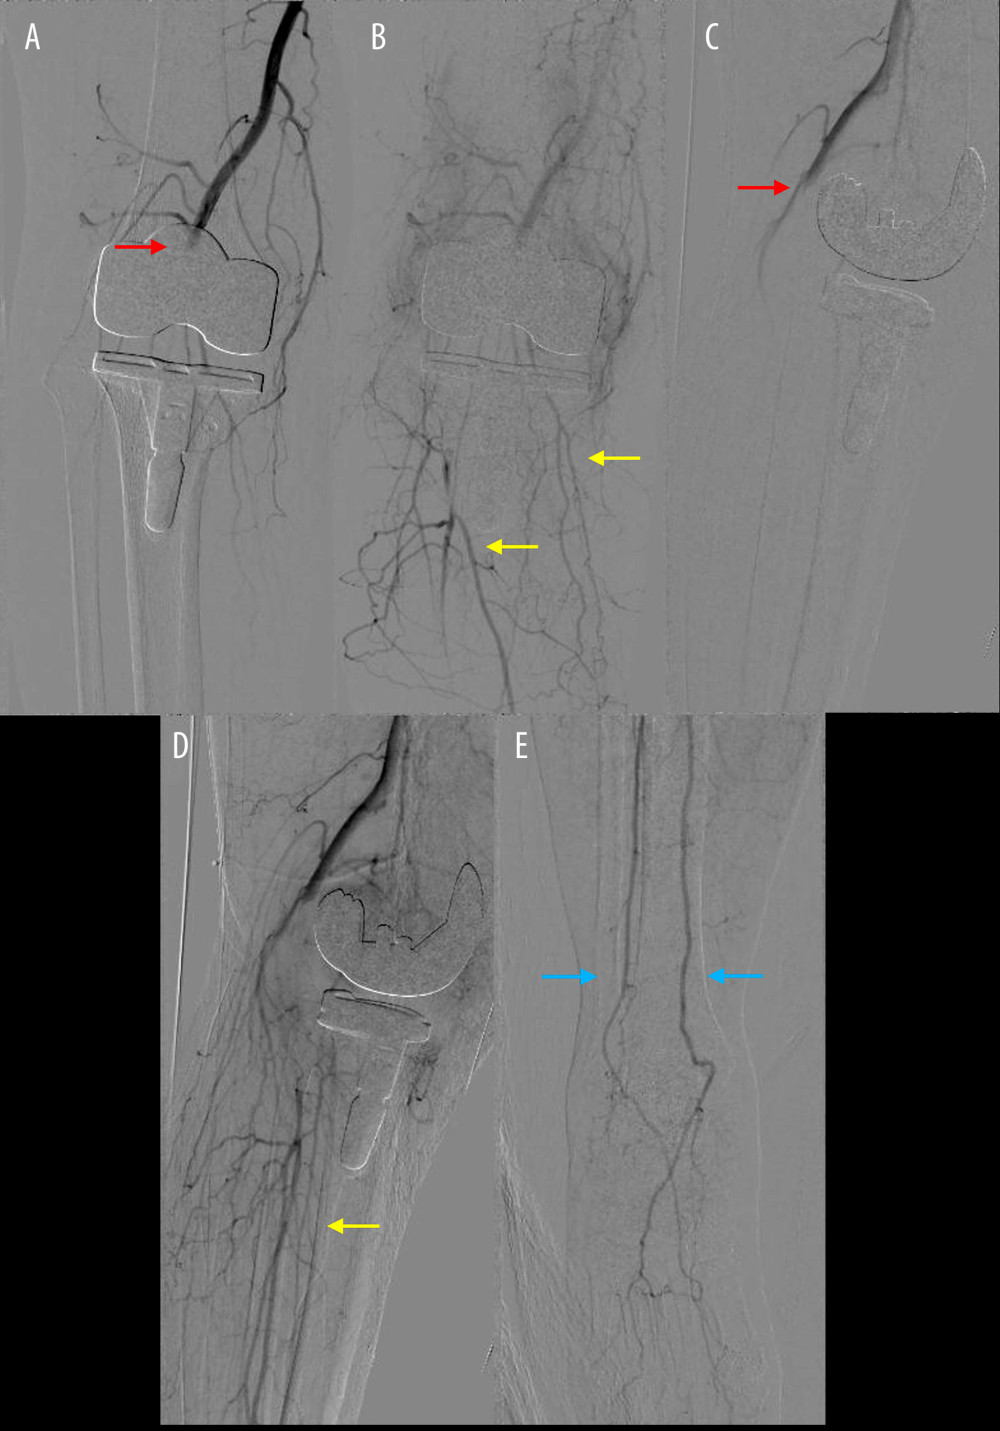 Angiography of the right knee showing occlusion of the popliteal artery with collateral perfusion of the anterior tibial artery, peroneal artery, and dorsalis pedis artery (Case 1); anteroposterior (A) and lateral (C) views of early phase showing occlusion of the popliteal artery (red arrow); anteroposterior (B) and lateral (D) views of late phase showing collateral perfusion of the anterior tibial artery and the peroneal artery (yellow arrow); and angiography of the right foot (E) showing the blood flow of the dorsalis pedis artery (blue arrow).